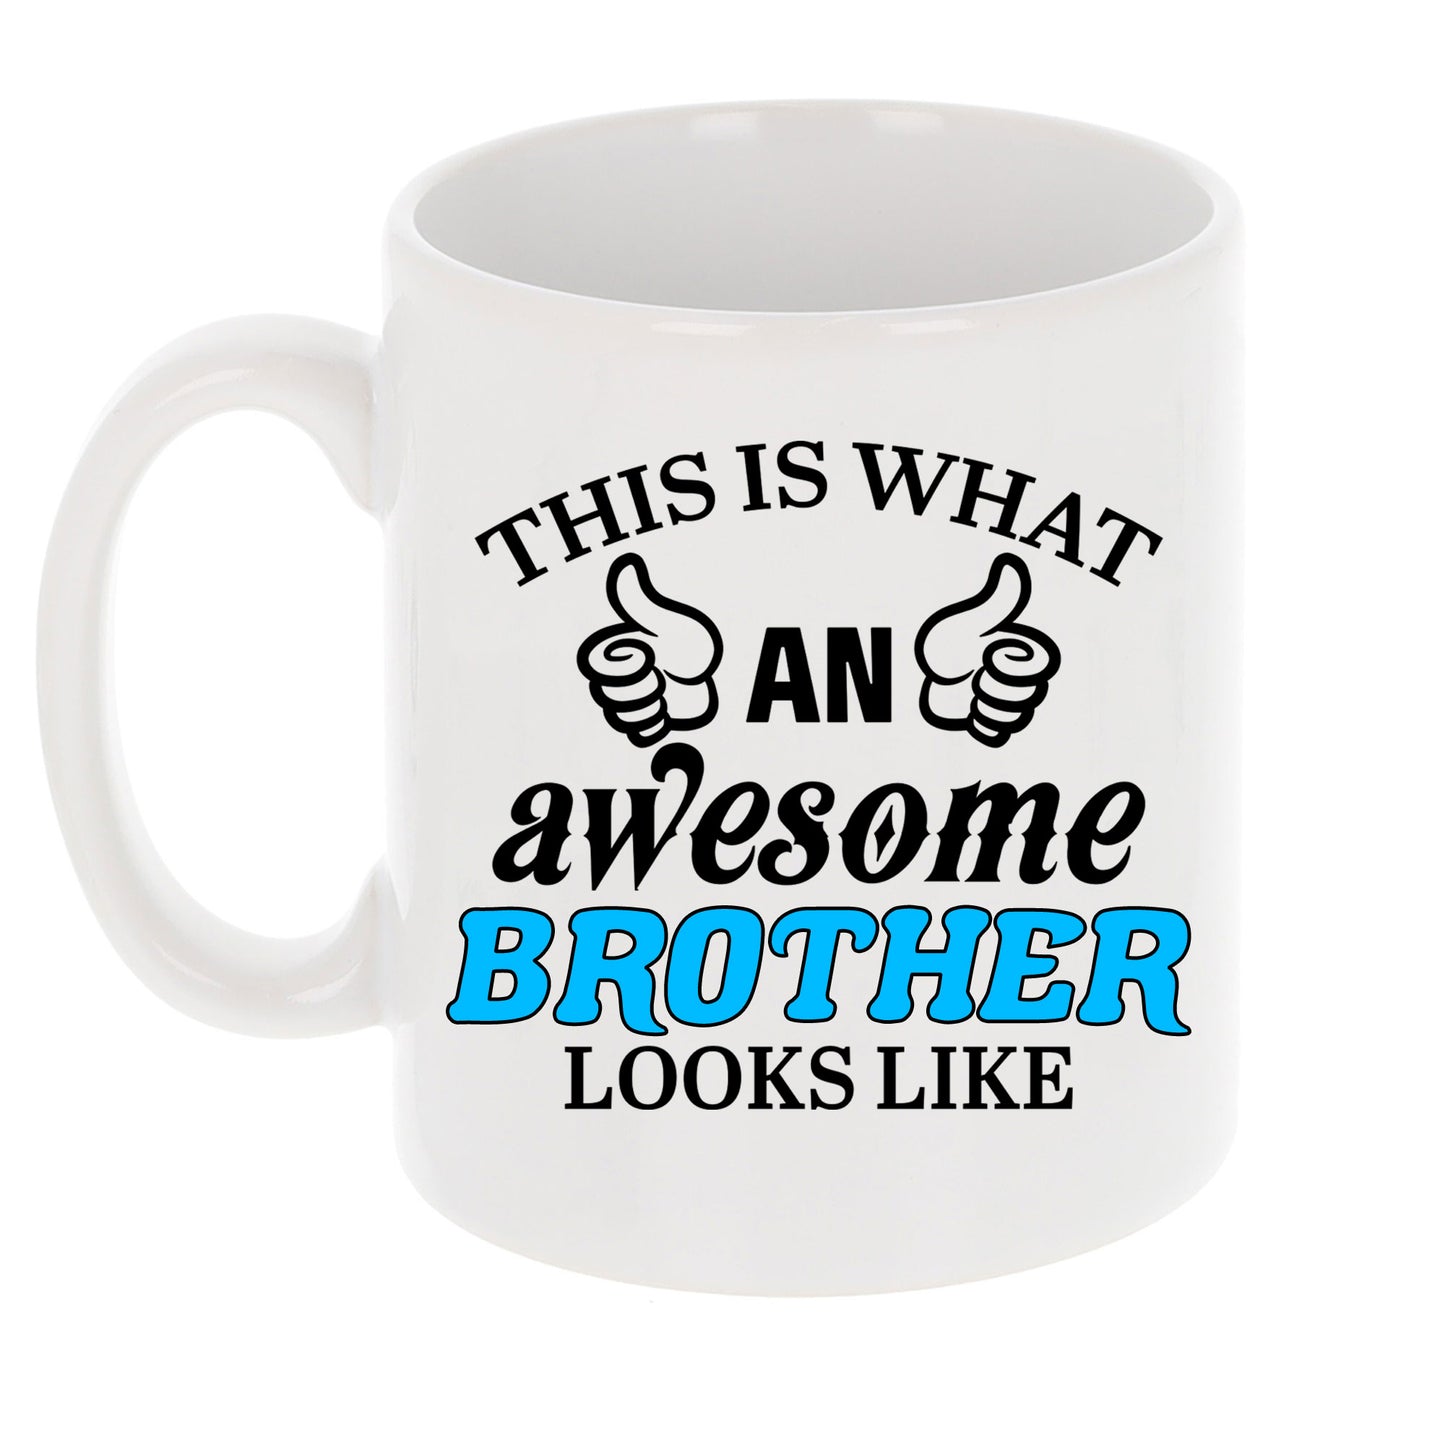 This Is What An Awesome Brother Looks Like Mug  - Always Looking Good -   